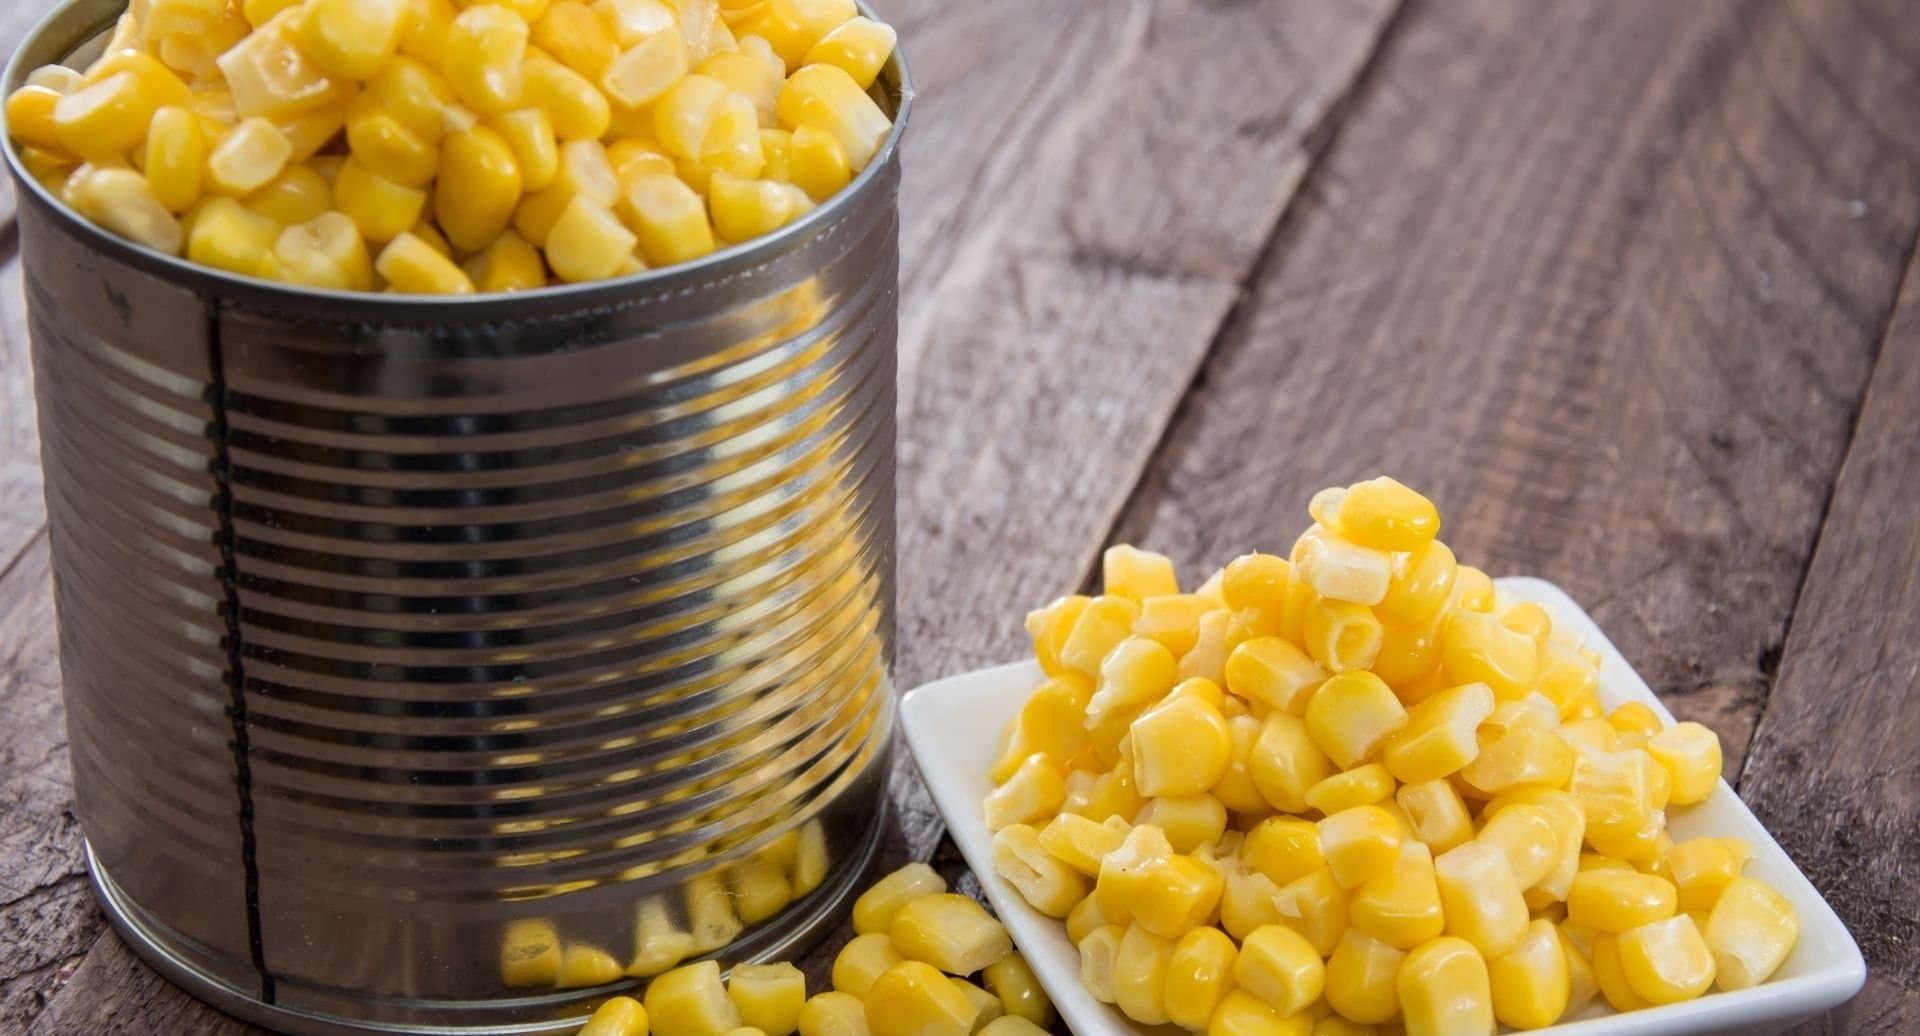 Introducing canned corn kernels + the best purchase price